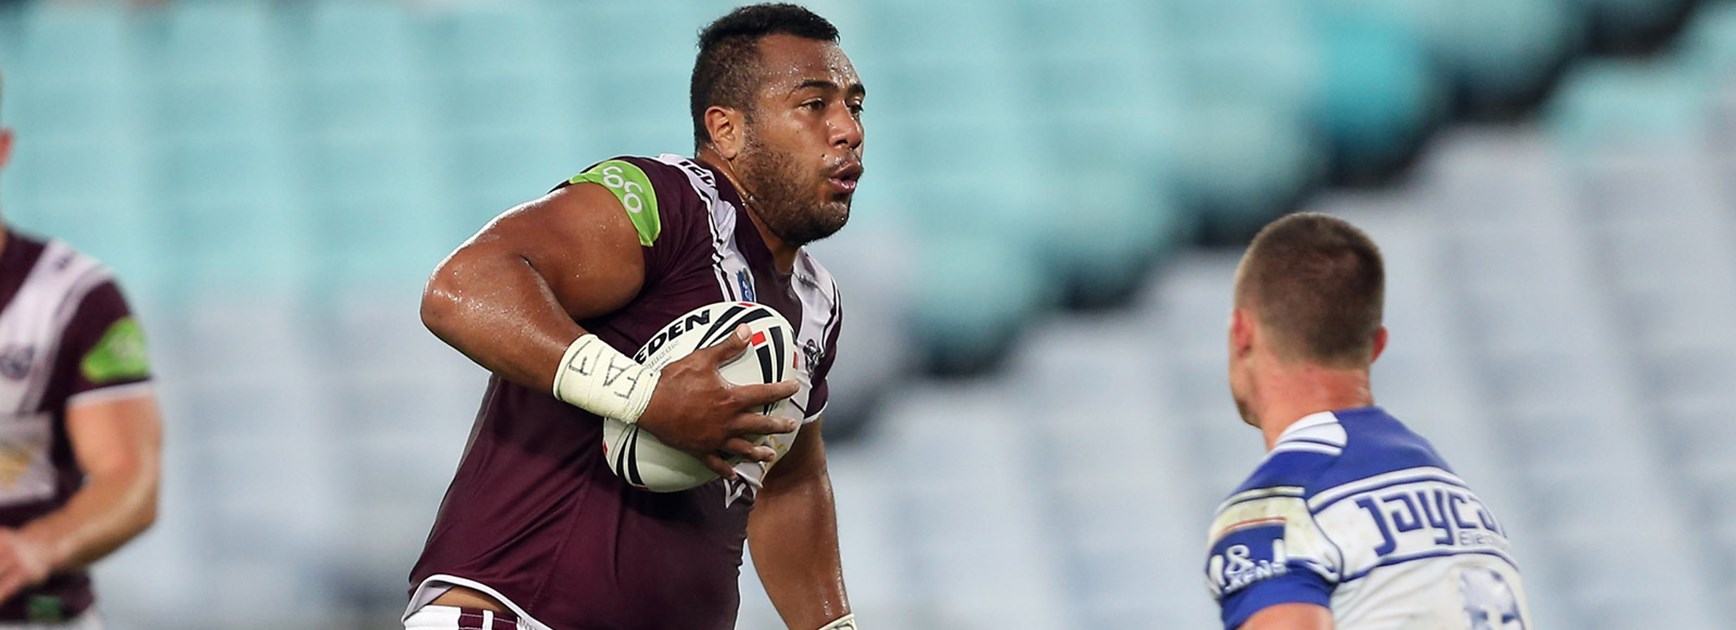 Sea Eagles forward Siosaia Vave playing for the club's NSW Cup side in 2015.